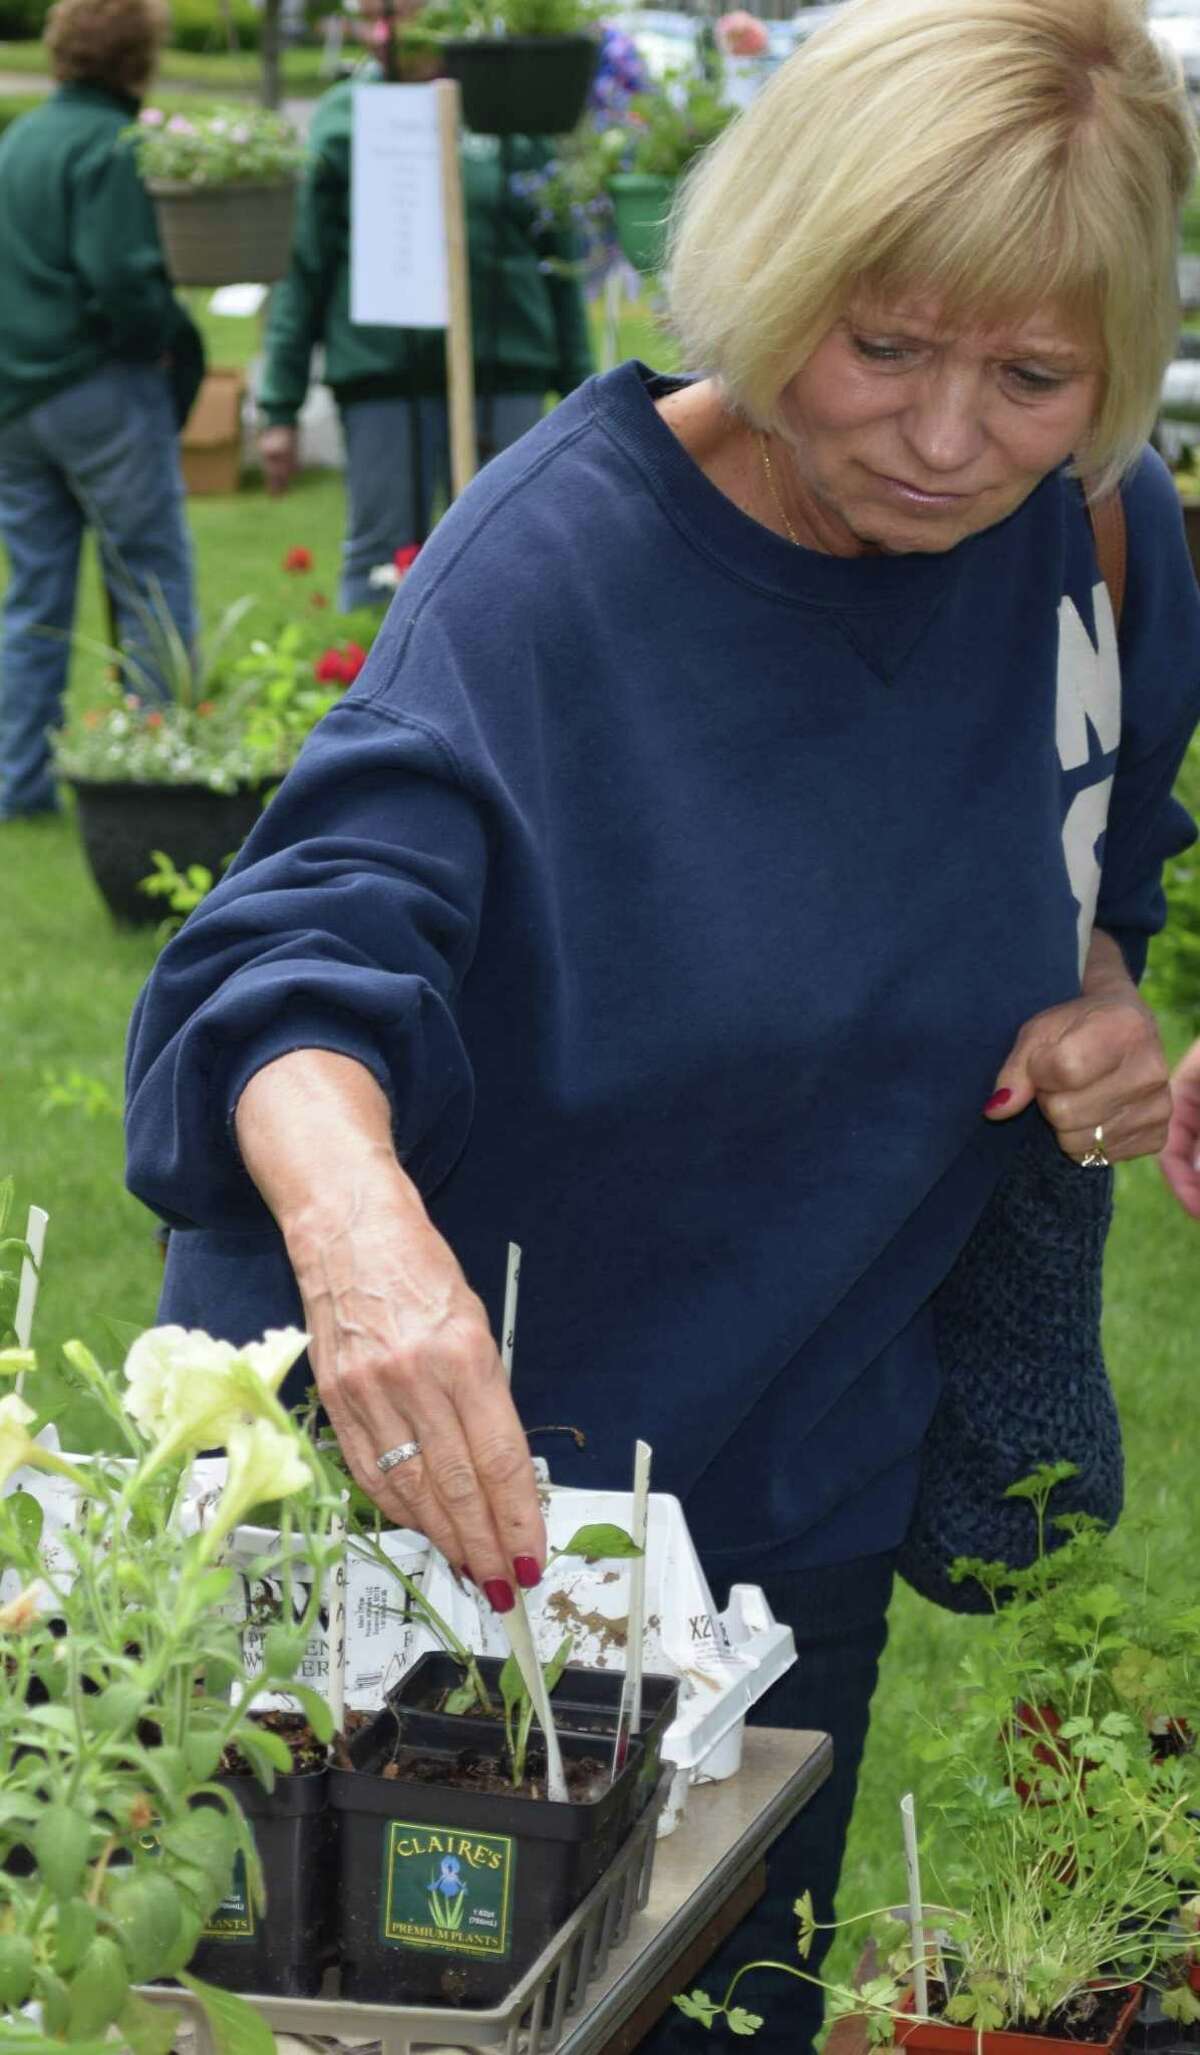 Kathy Matusiak of New Milford admires the variety of items, including sweet bell peppers, available at the Garden Club sale.